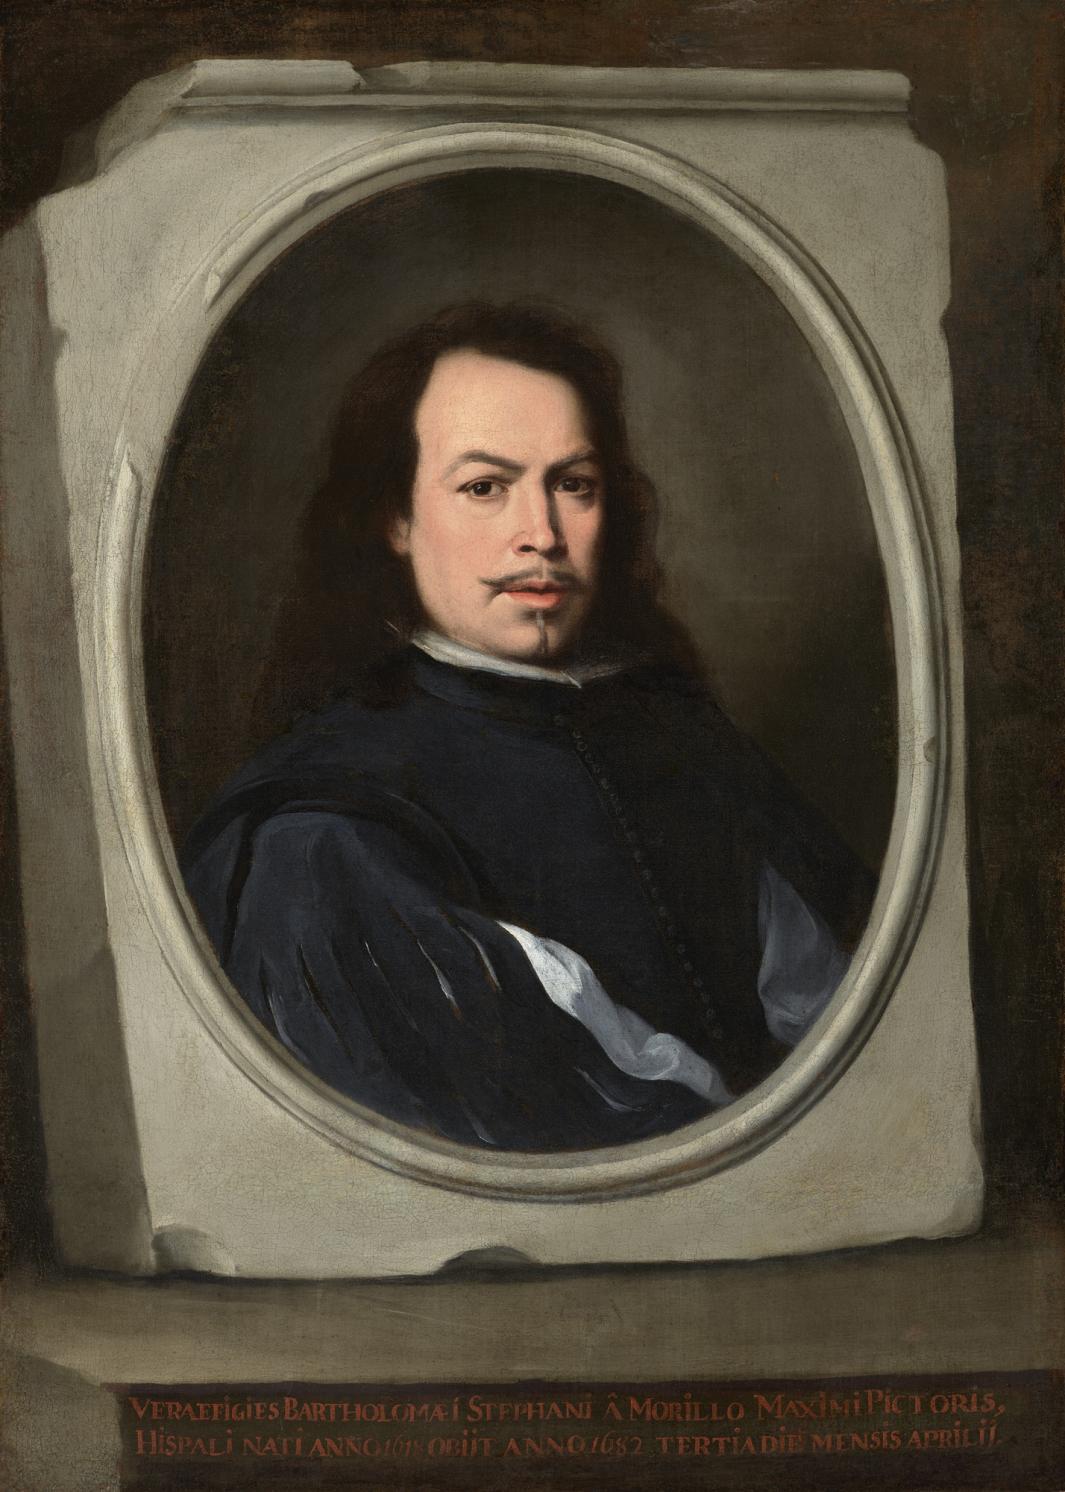 Painted bust portrait by Murillo showing a man wearing black in a trompe l'oeil oval frame